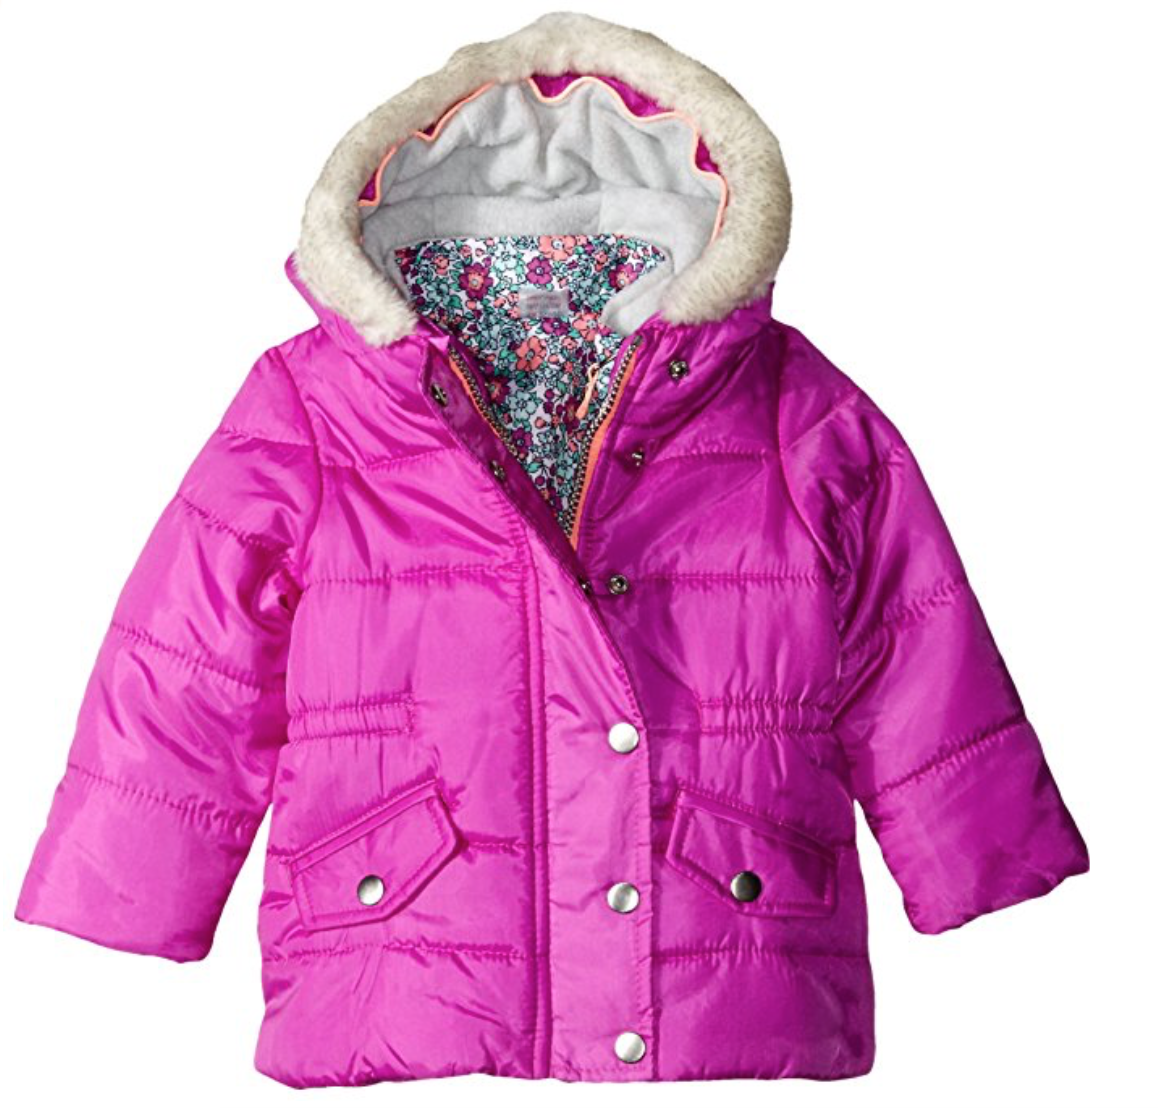 Carter's Baby Girls' Infants Heavyweight Systems Jacket only $17.60